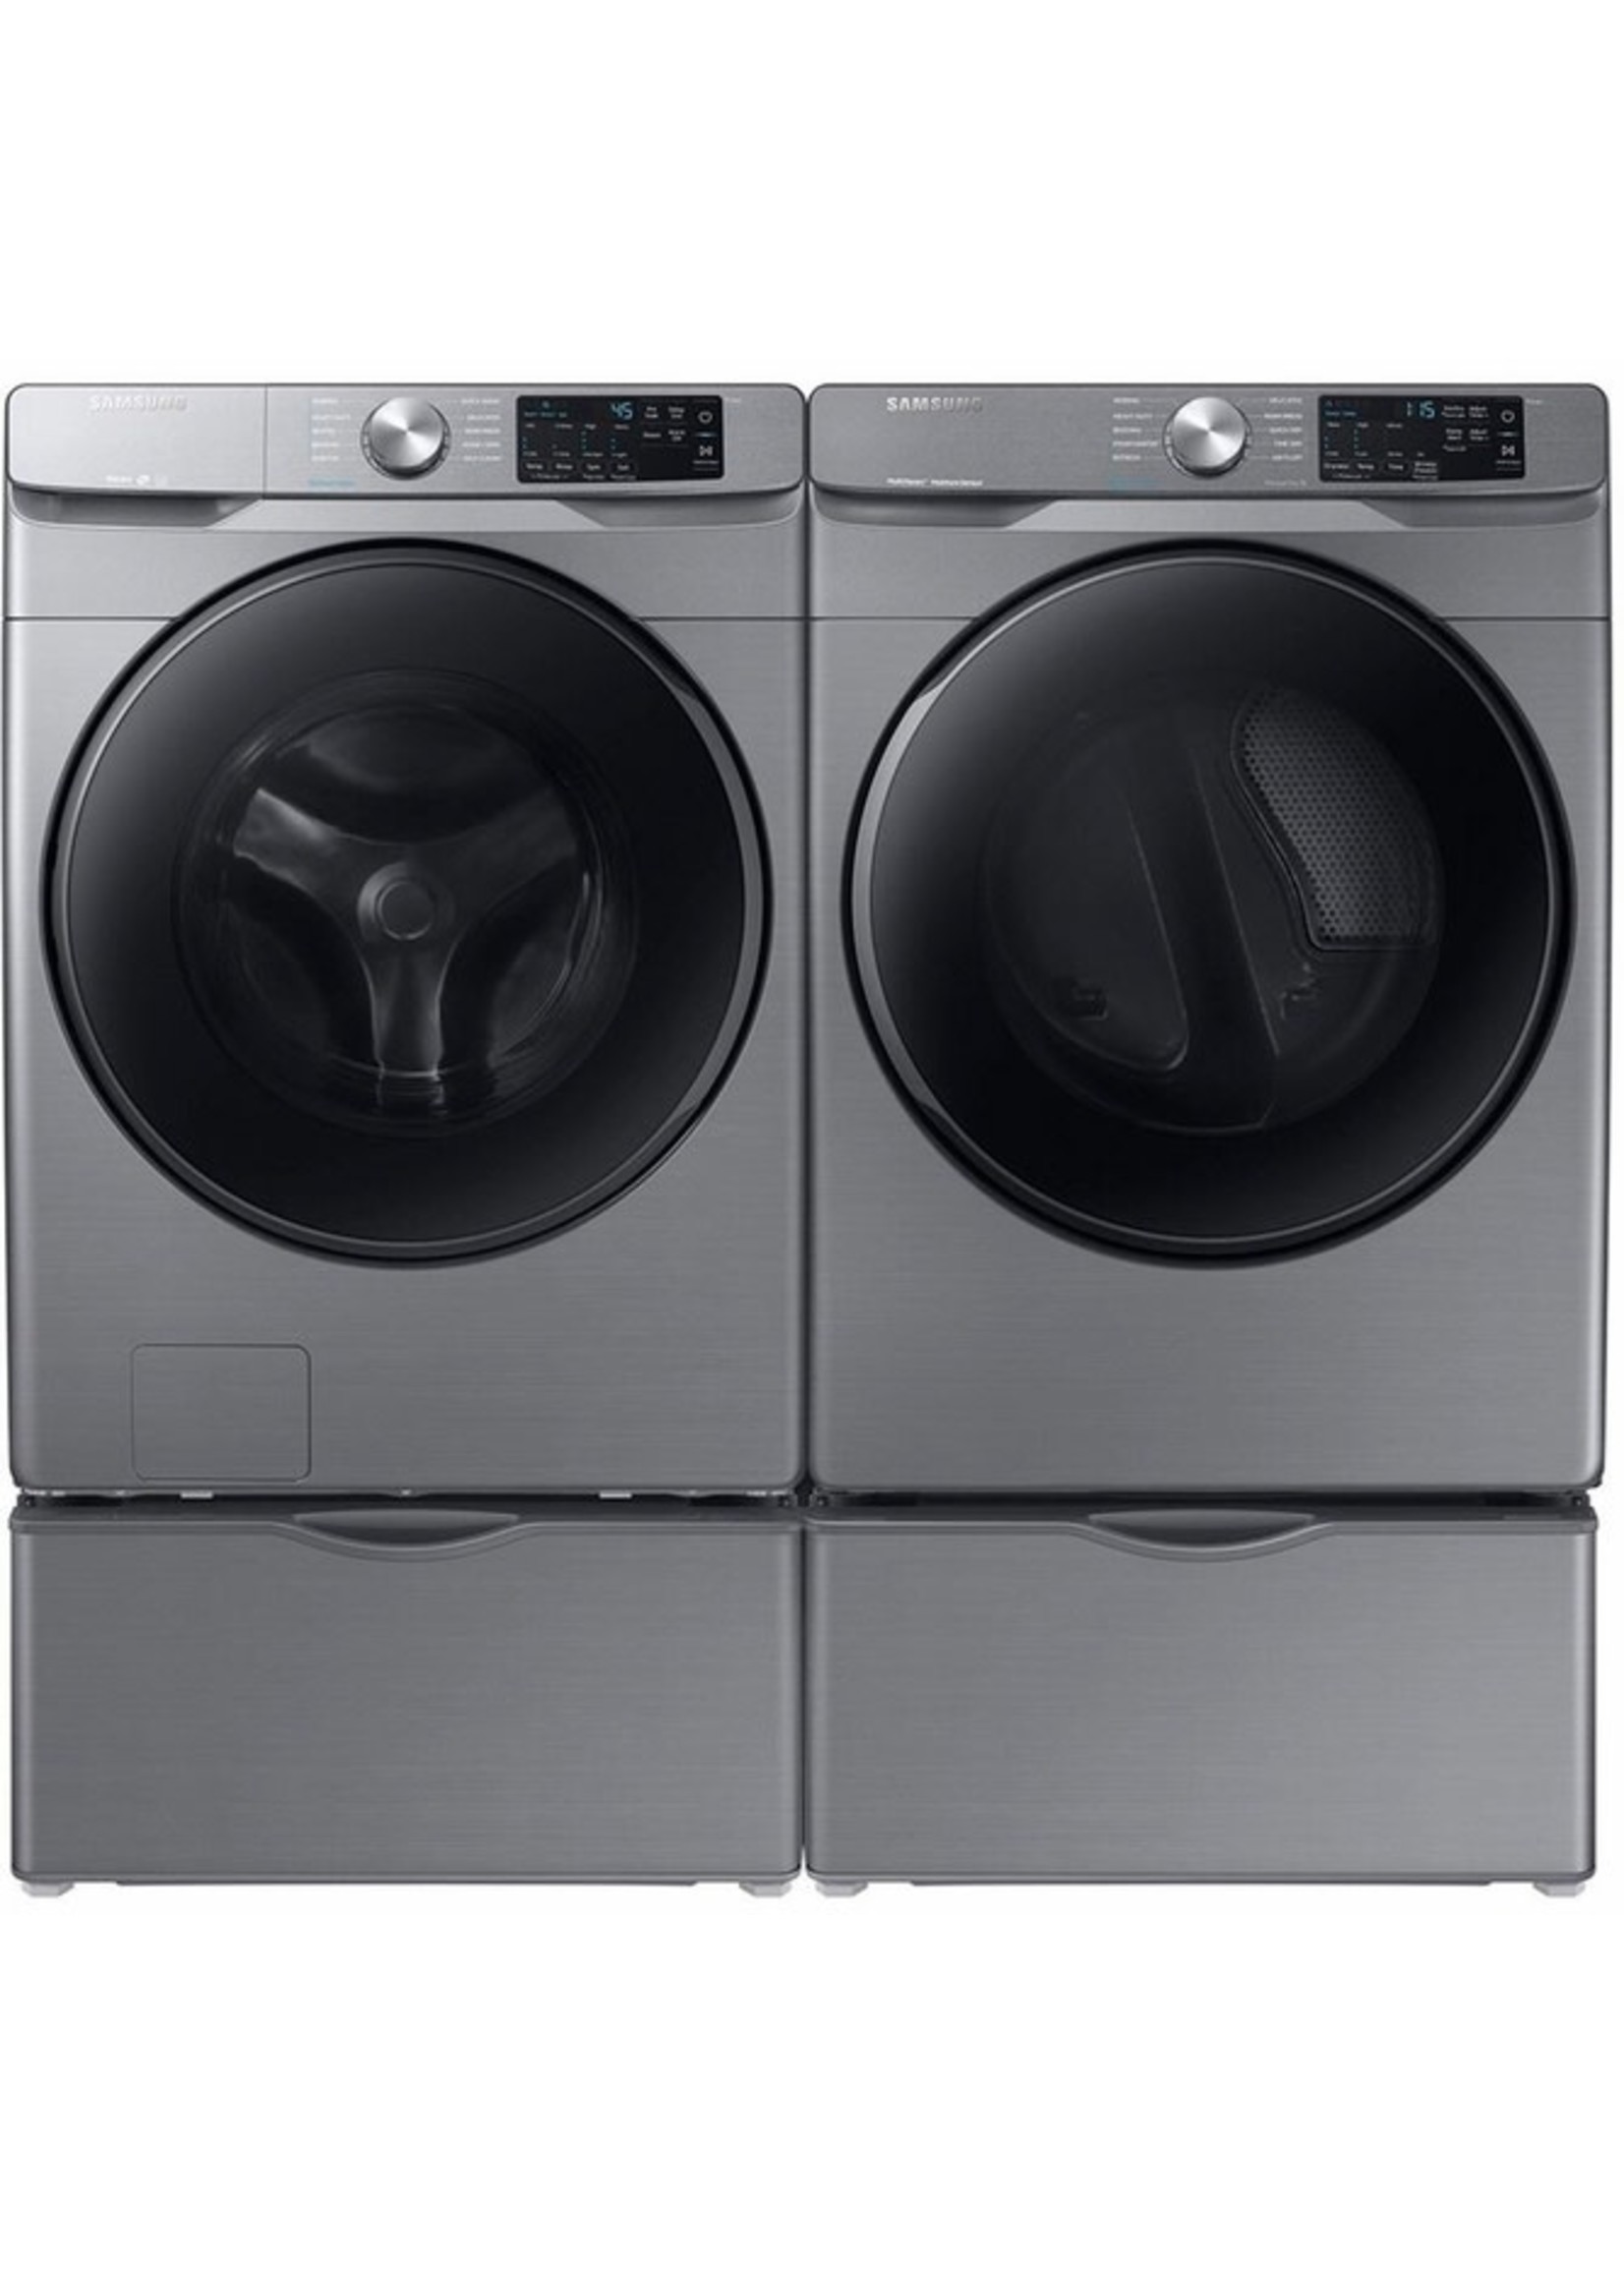 SAMSUNG Samsung 27" Smart 4.5 cu. ft. Front Load Washer with Self Clean and Smart Care - Platinum  And Electric Dryer Set With Pedestal